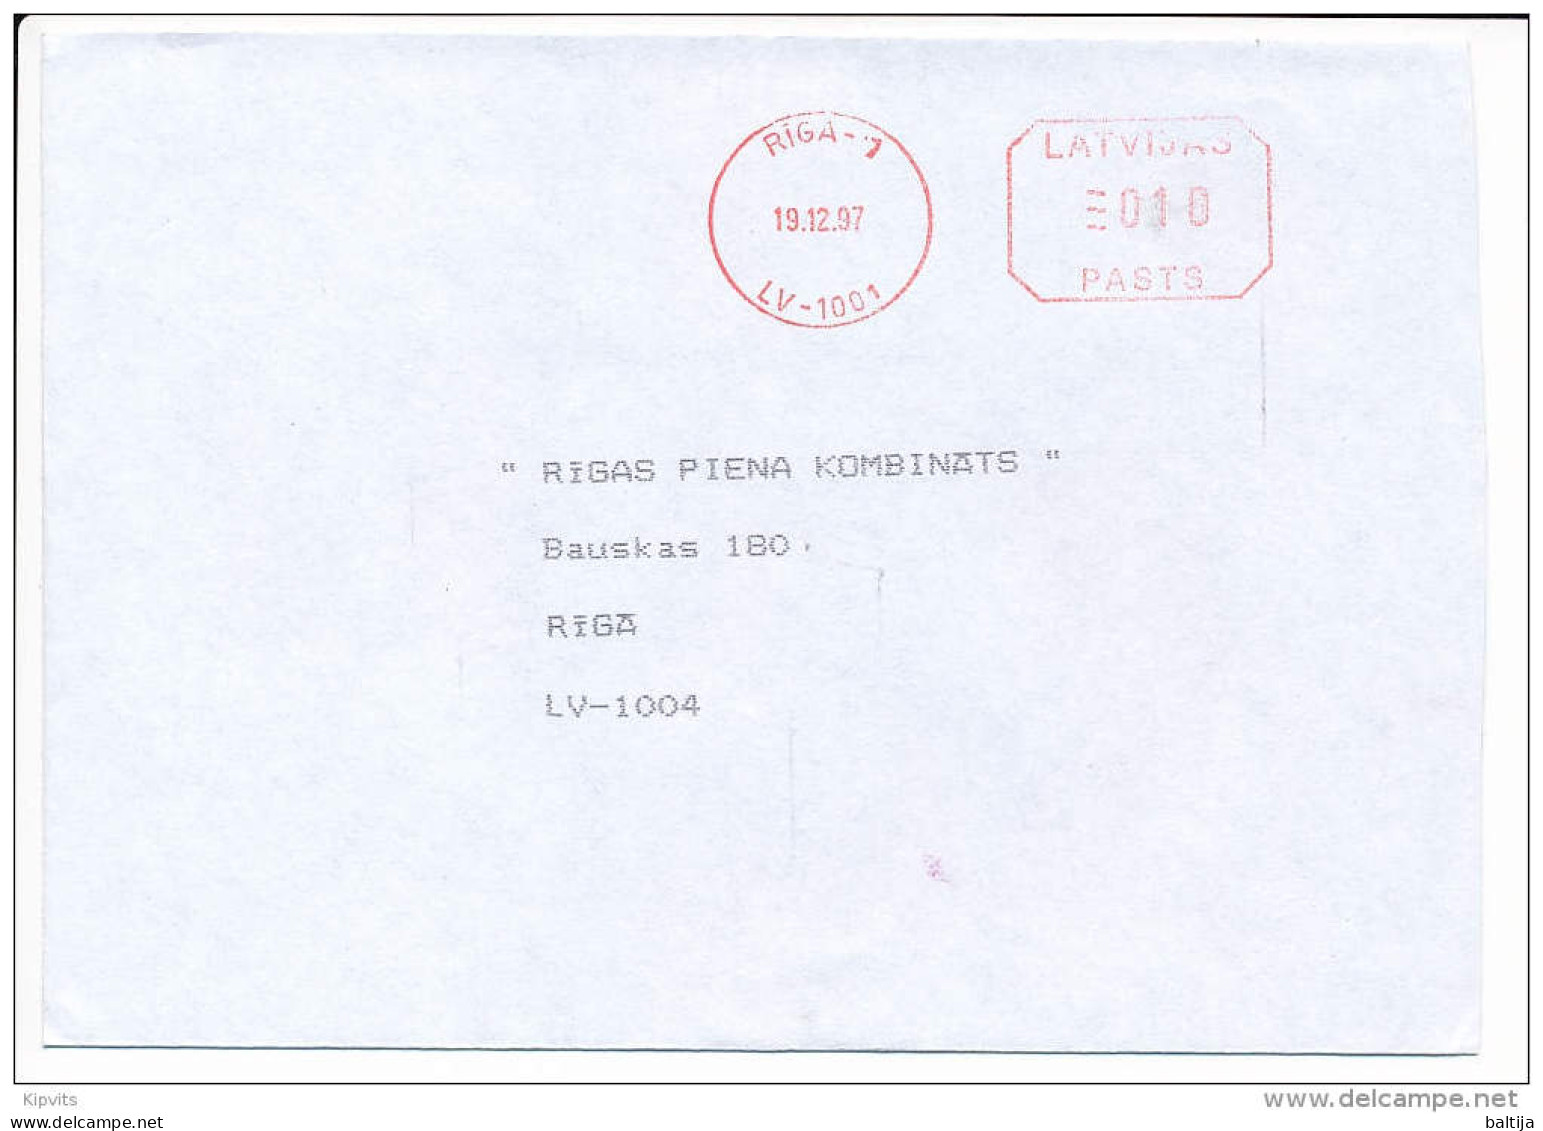 Post Office Meter Cover / Pitney Bowes - 19 December 1997 Riga-1 - Latvia